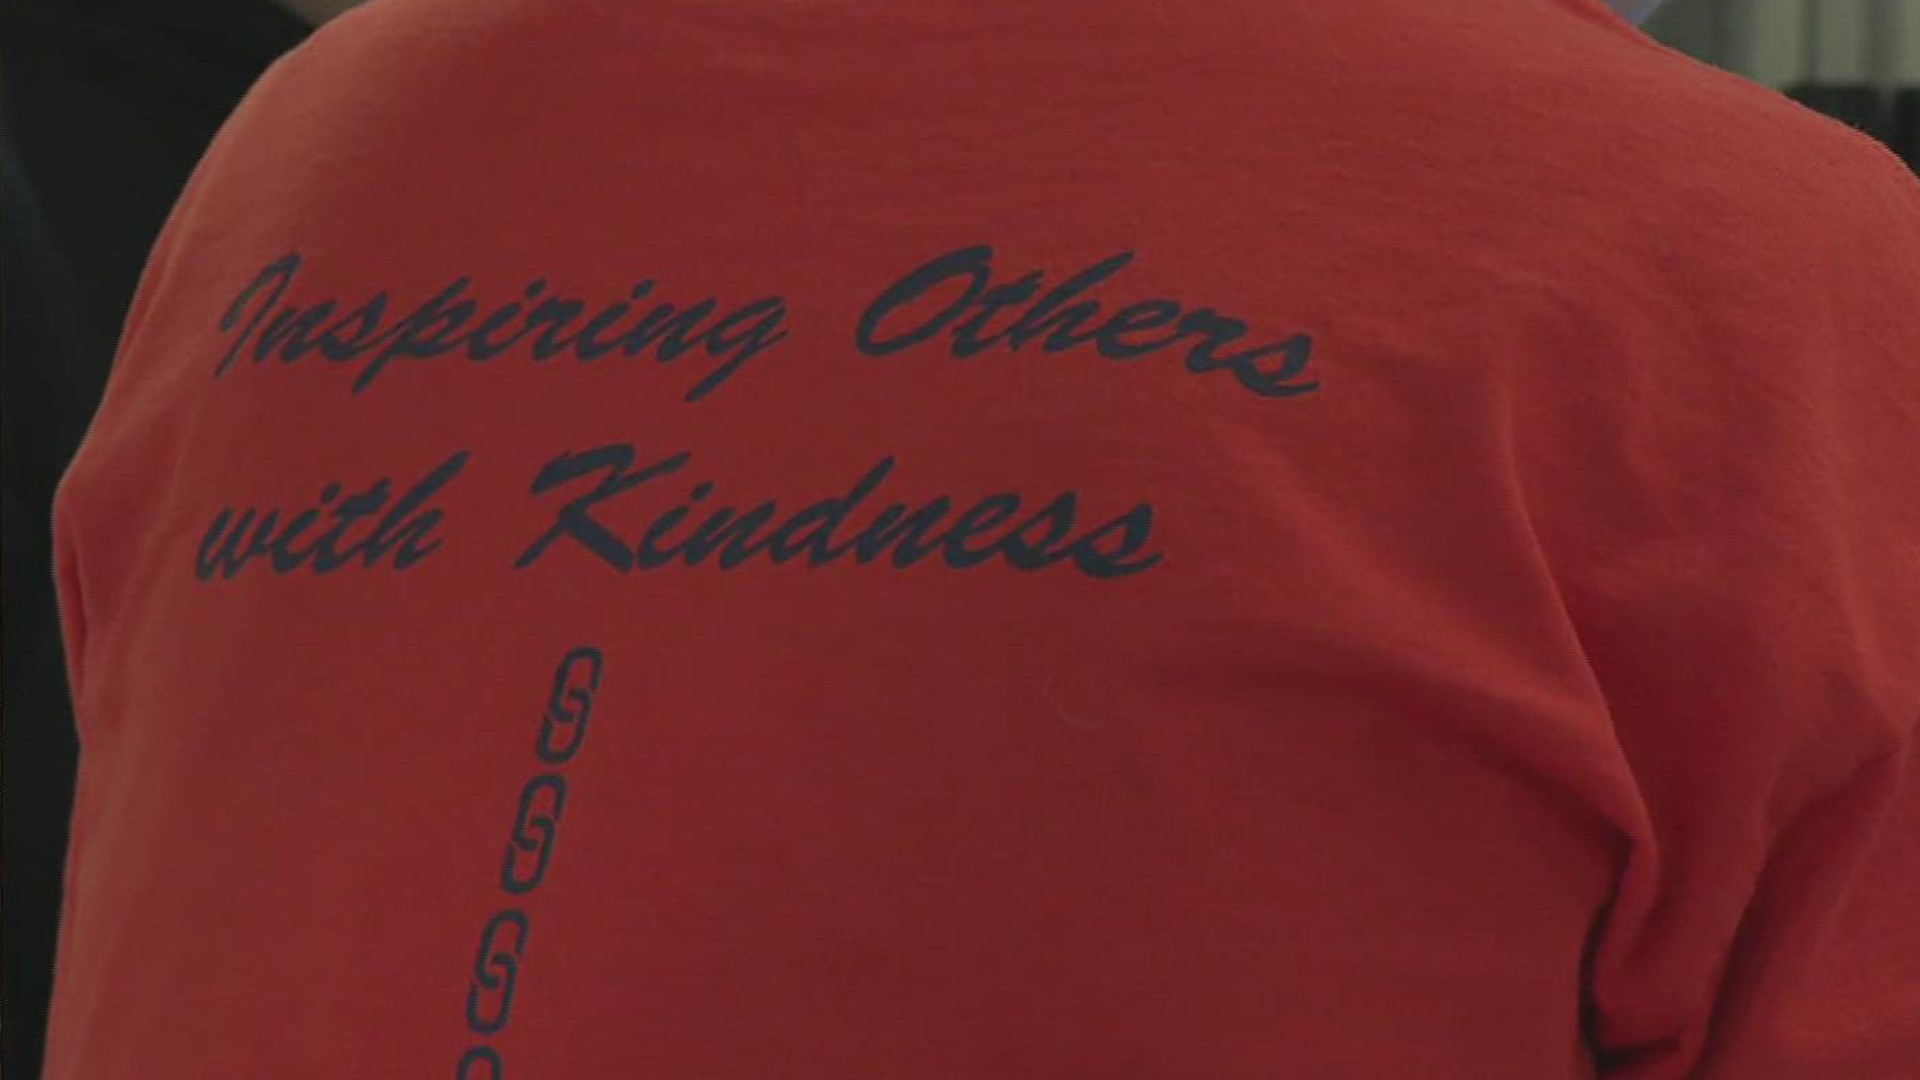 For the past decade, Wayne Co. has taken part in an initiative to spread kindness. It's in memory of a teen killed in the Columbine massacre more than 20 years ago.